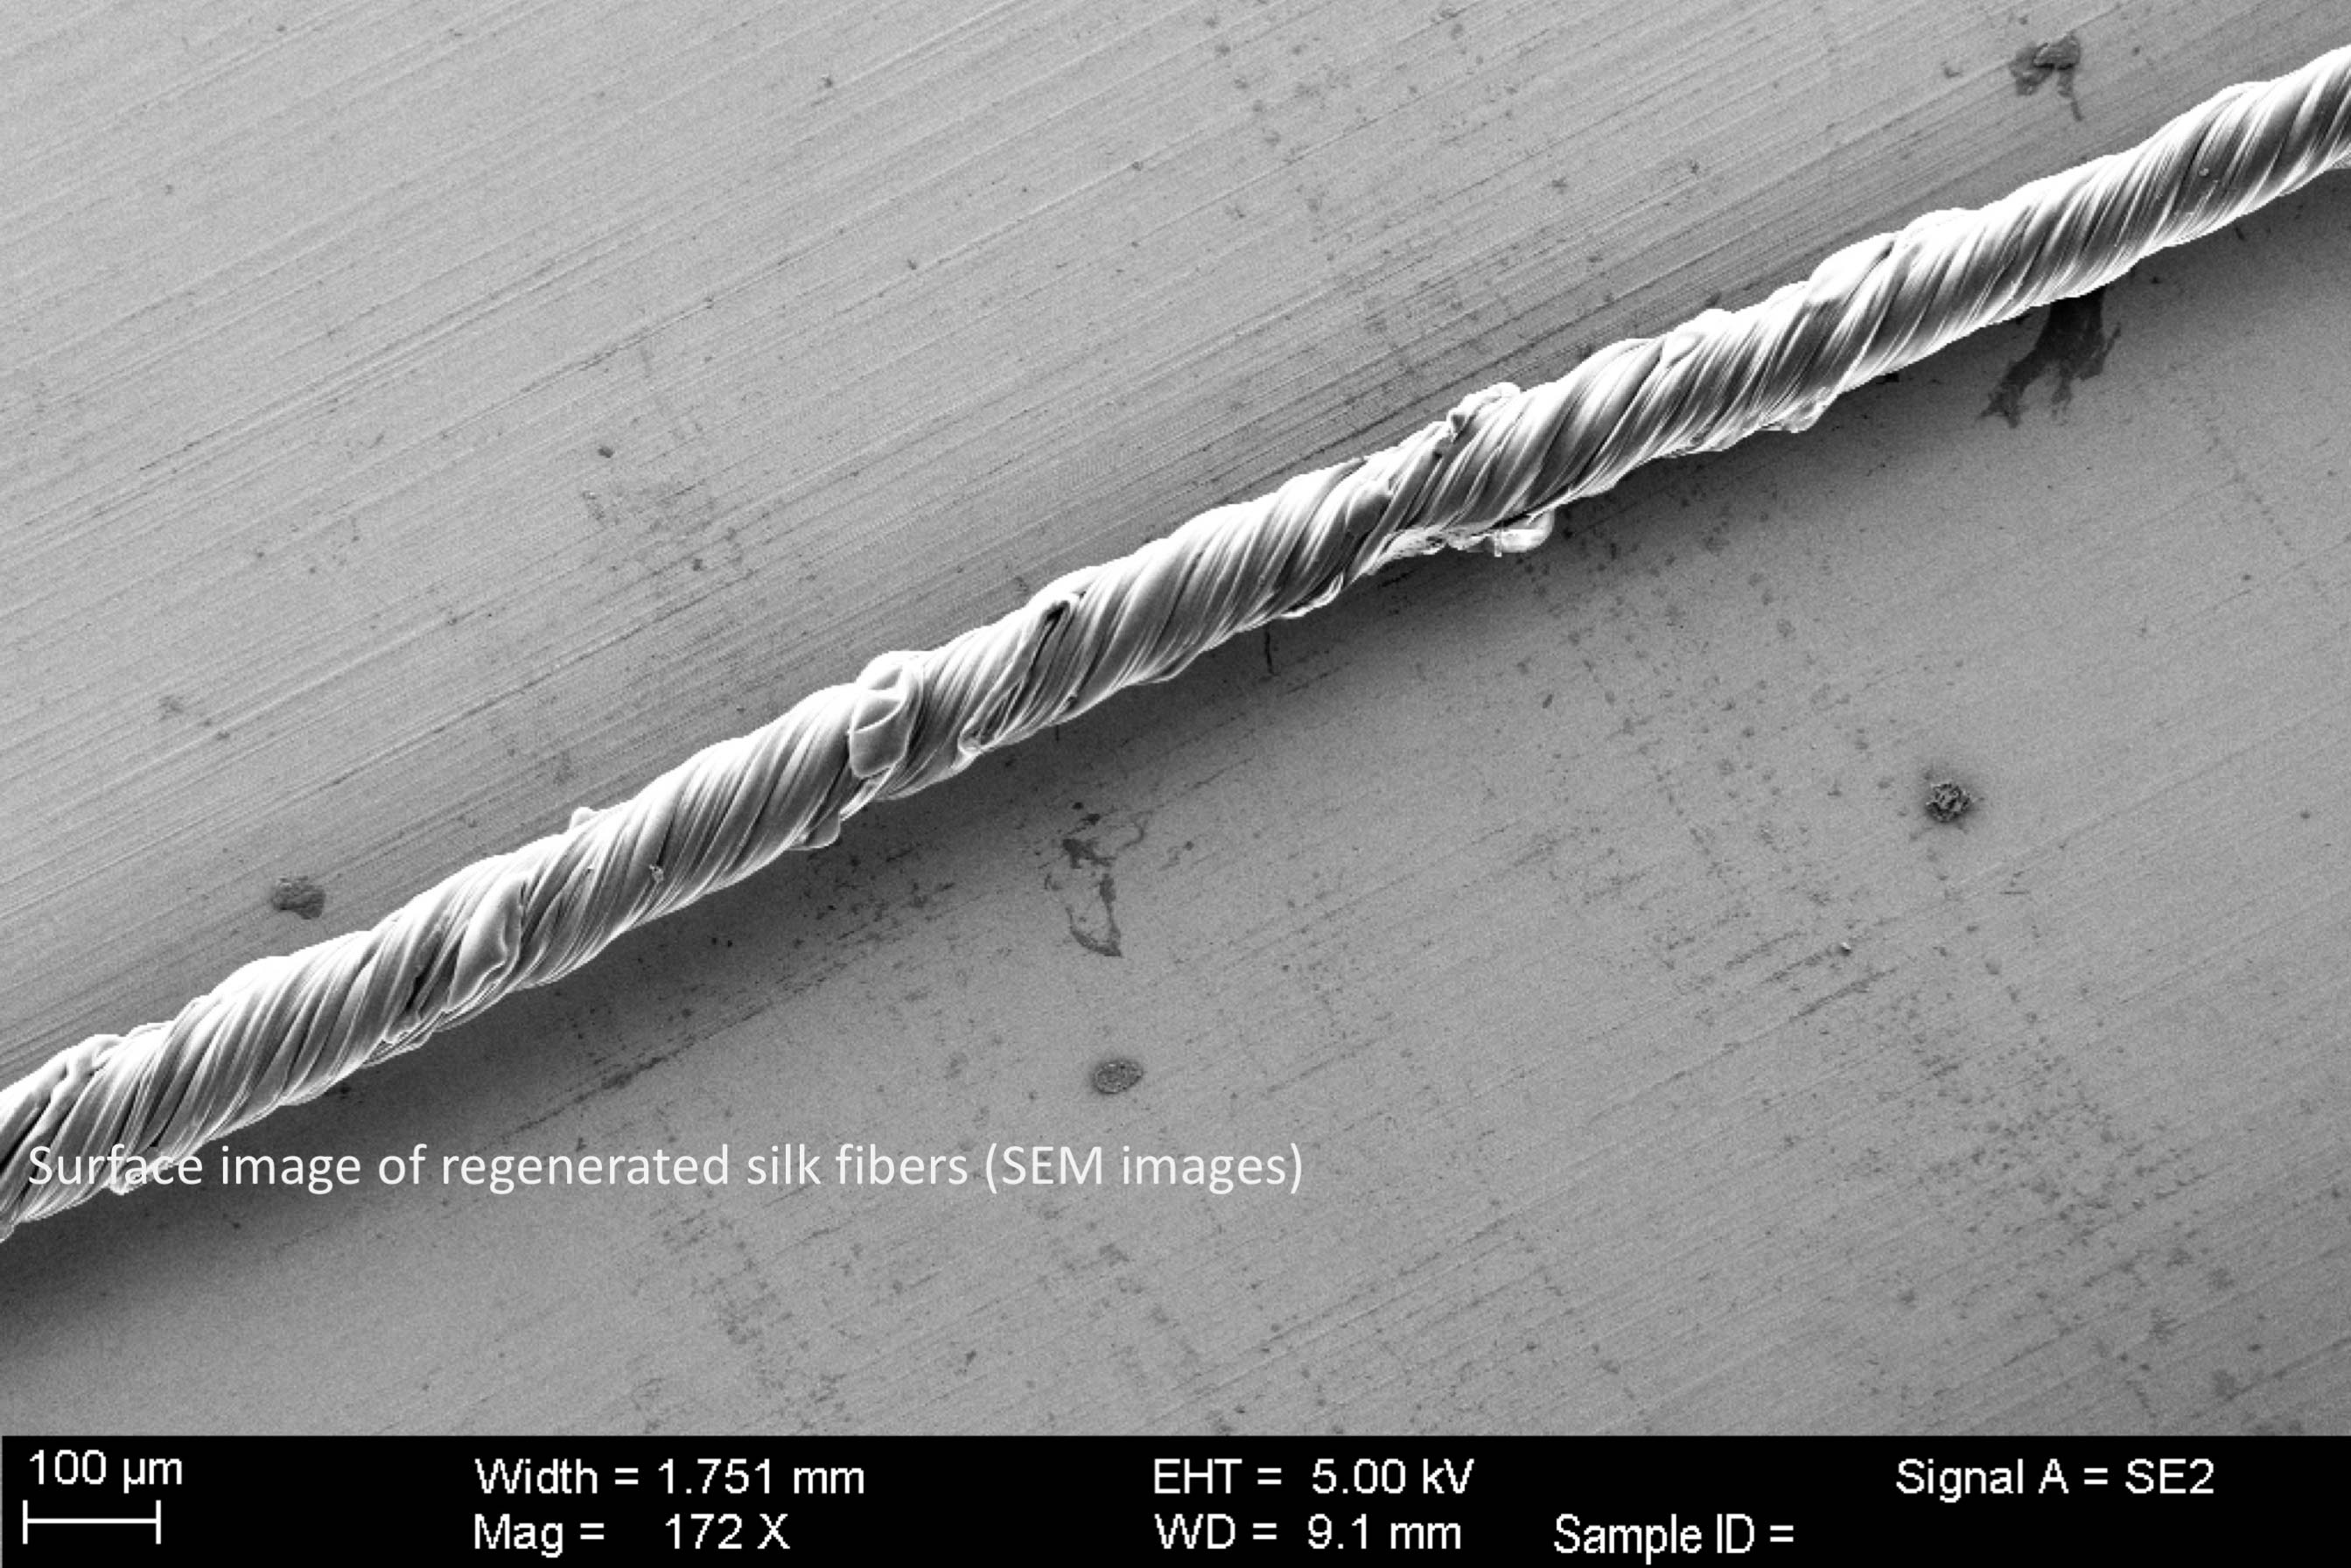 Surface image of regenerated silk fibers. (Credits: Courtesy of the researchers)